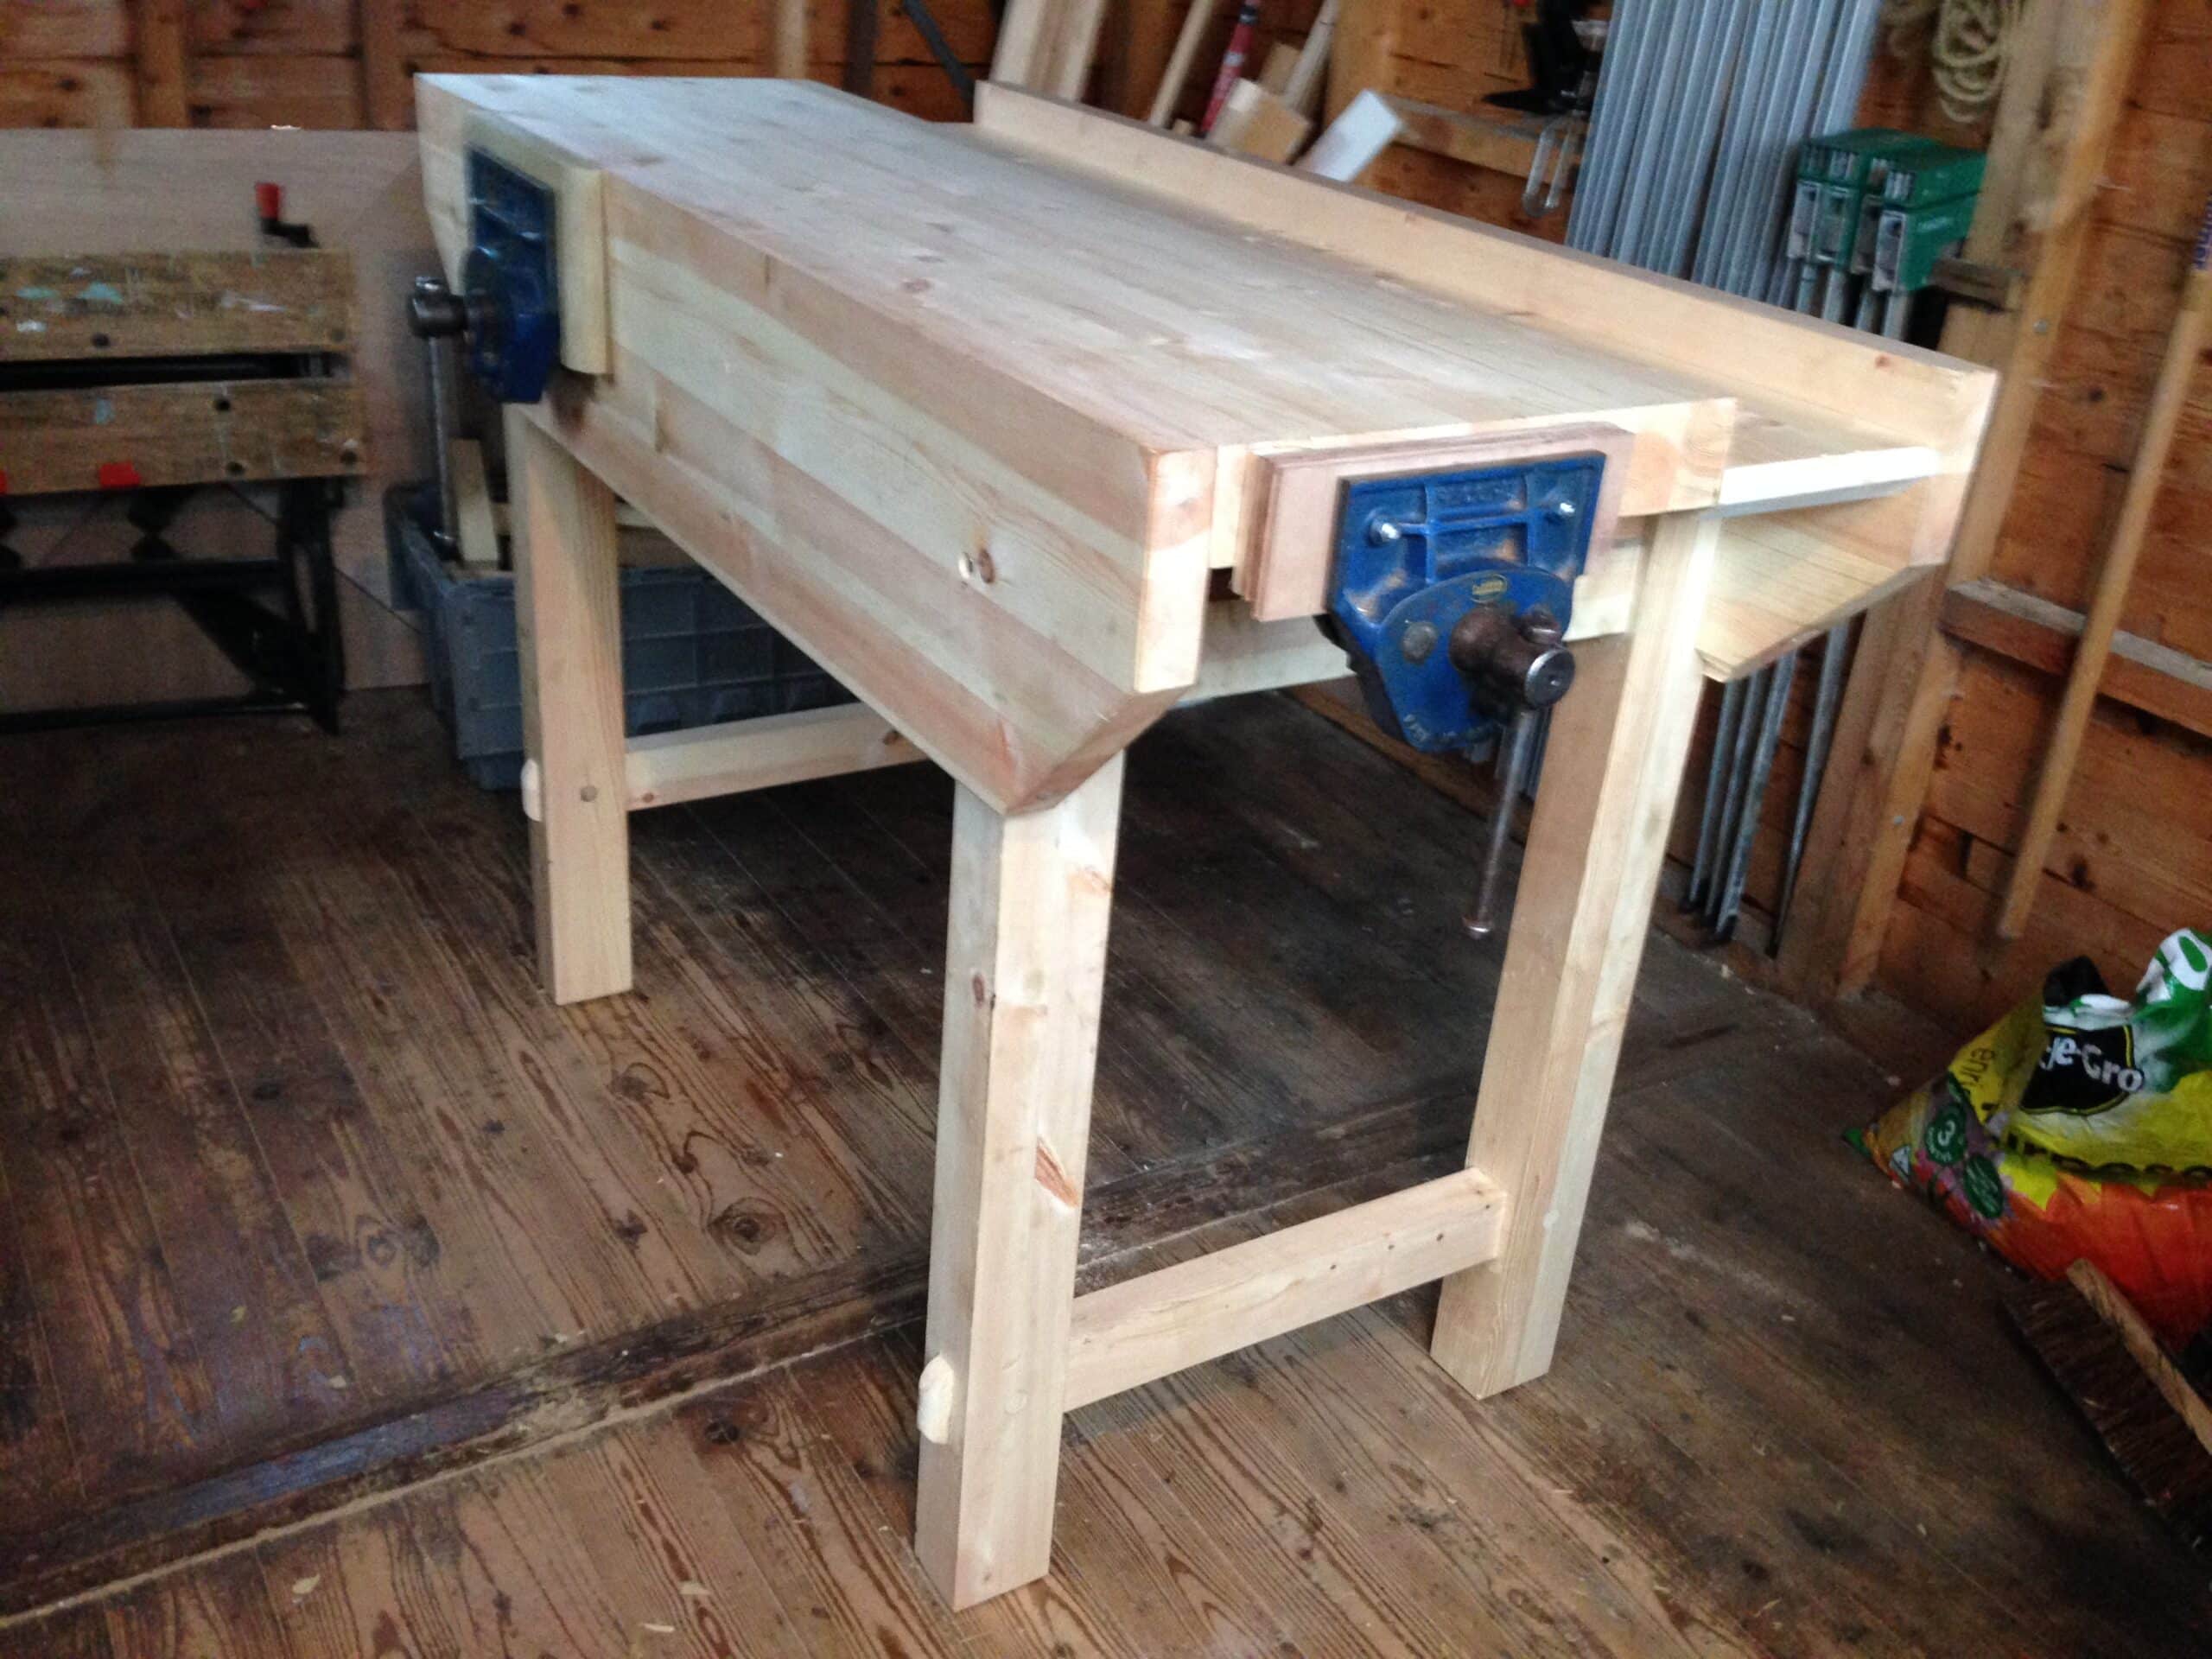 Spruce top with reclaimed timber for the legs and Mahogany vise jaws.